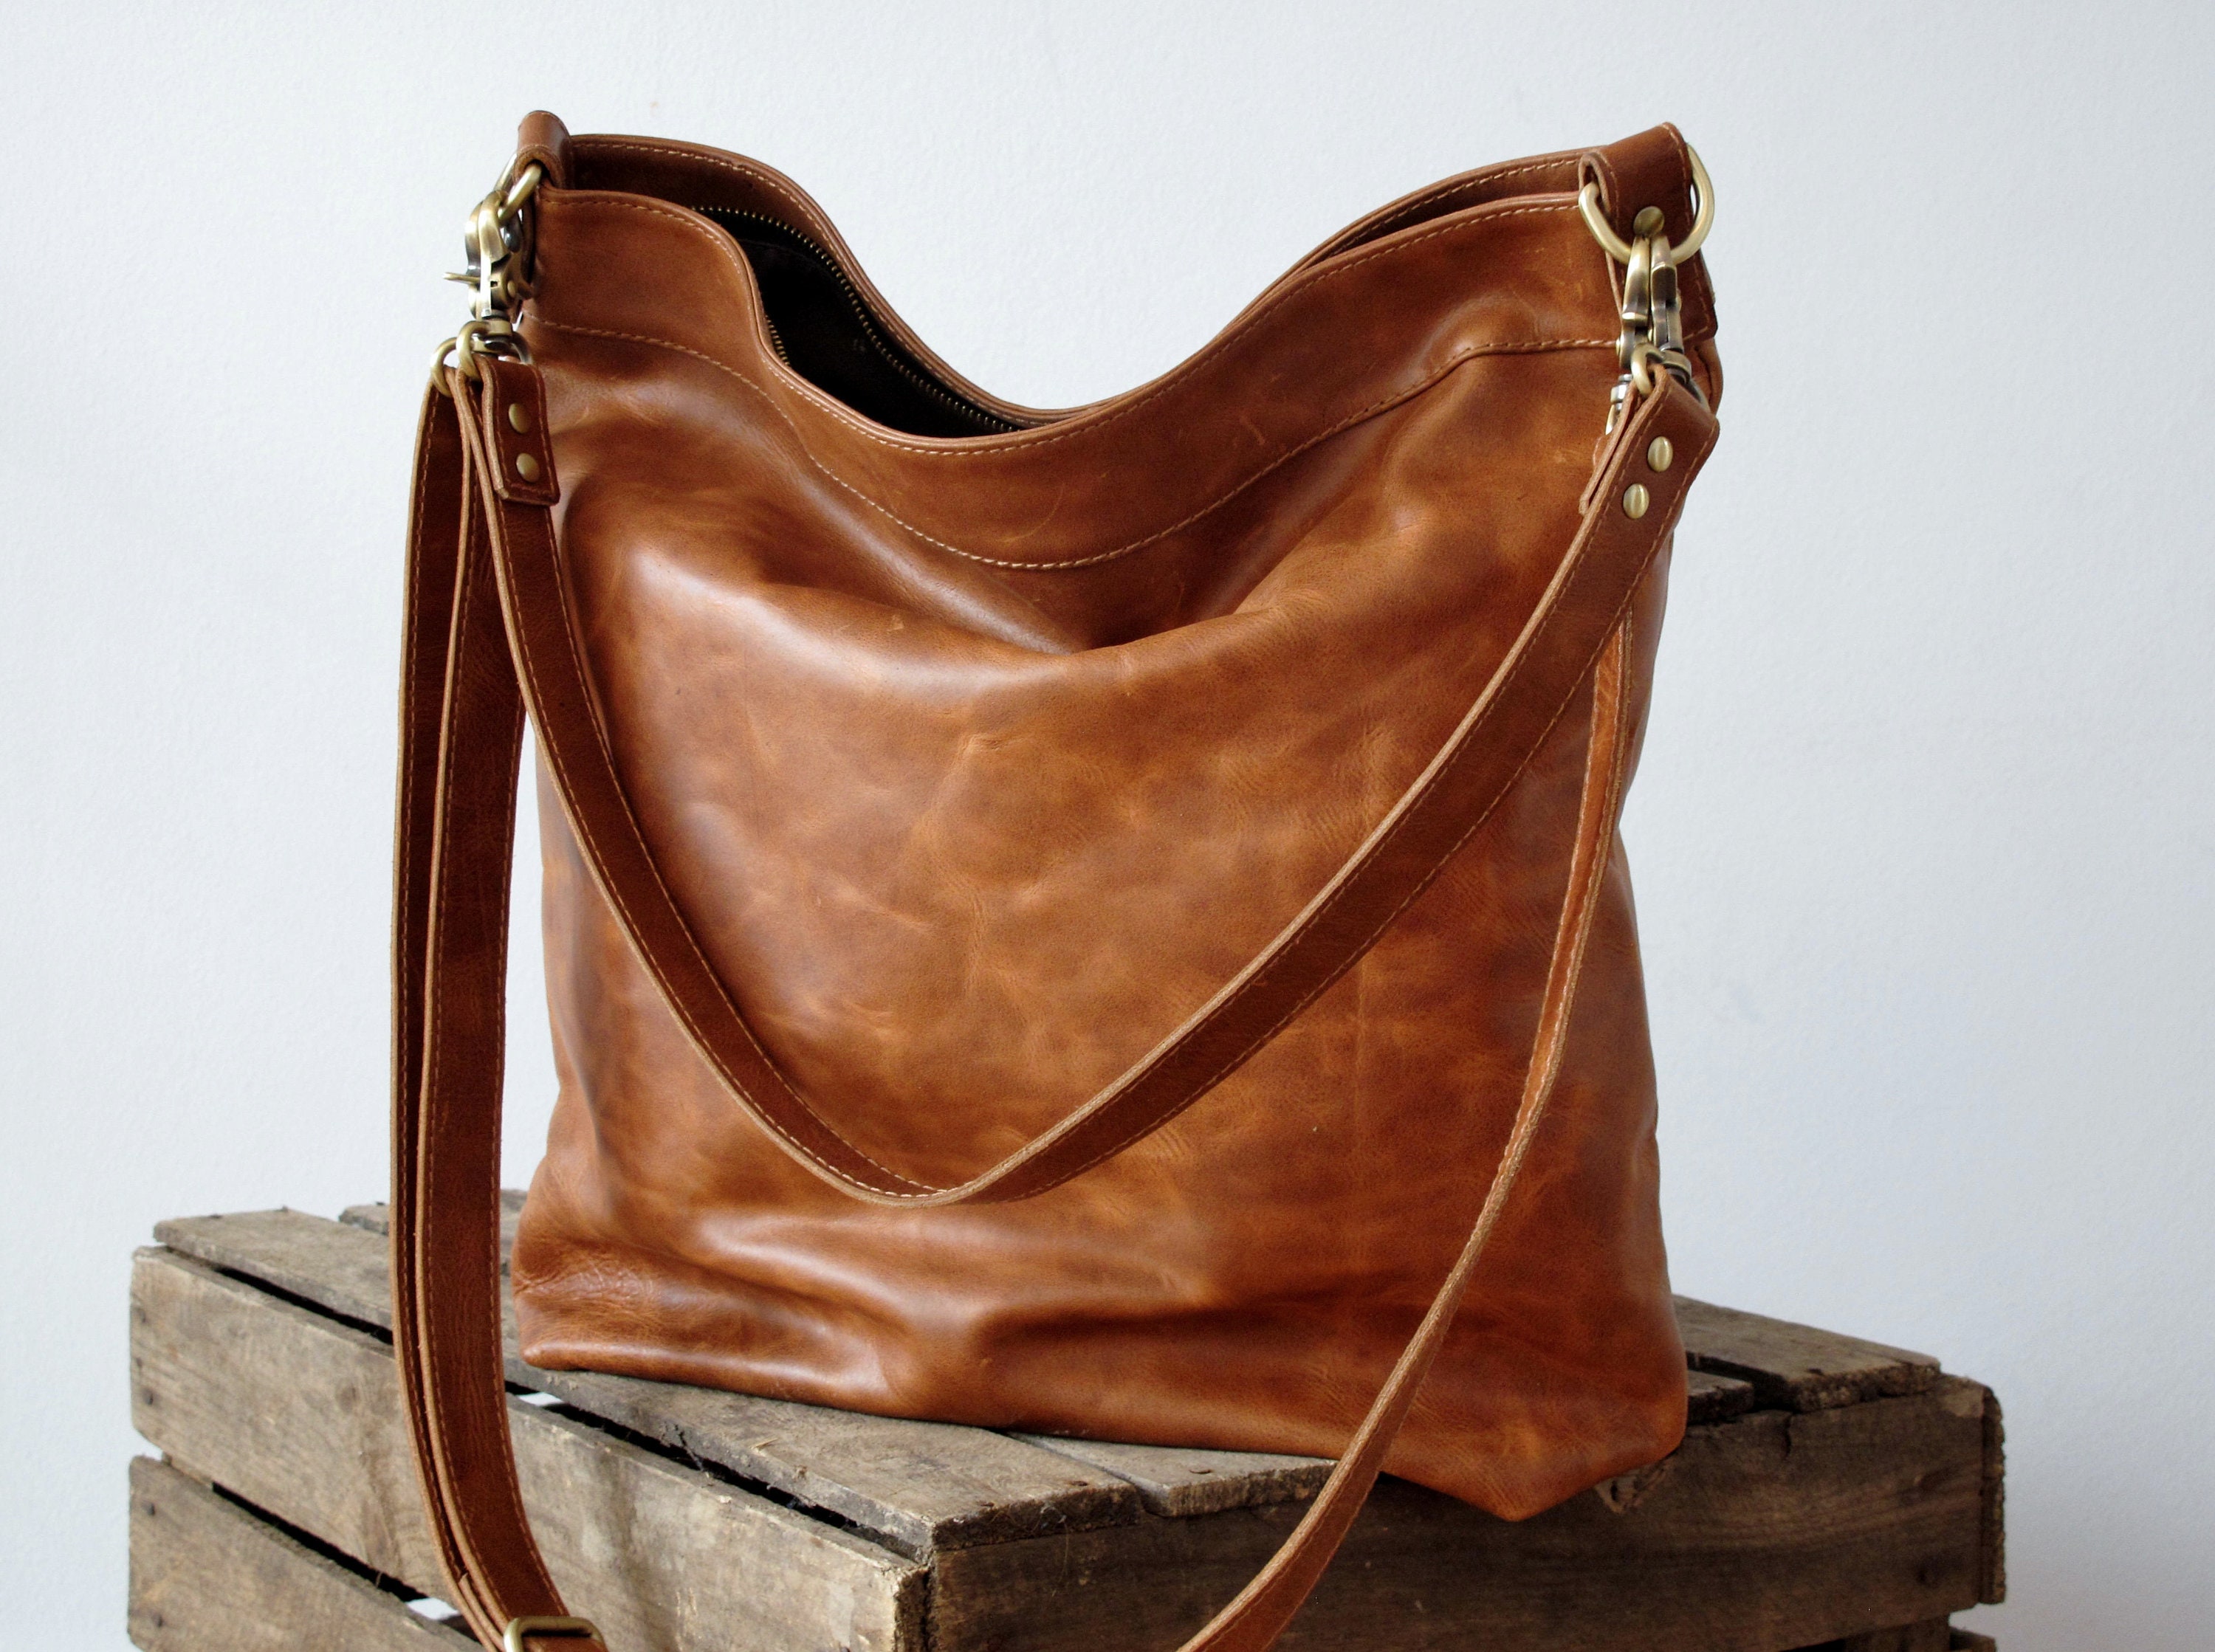 Buy Tan Leather Hobo Bag Large Purse for Women Tote Bag With